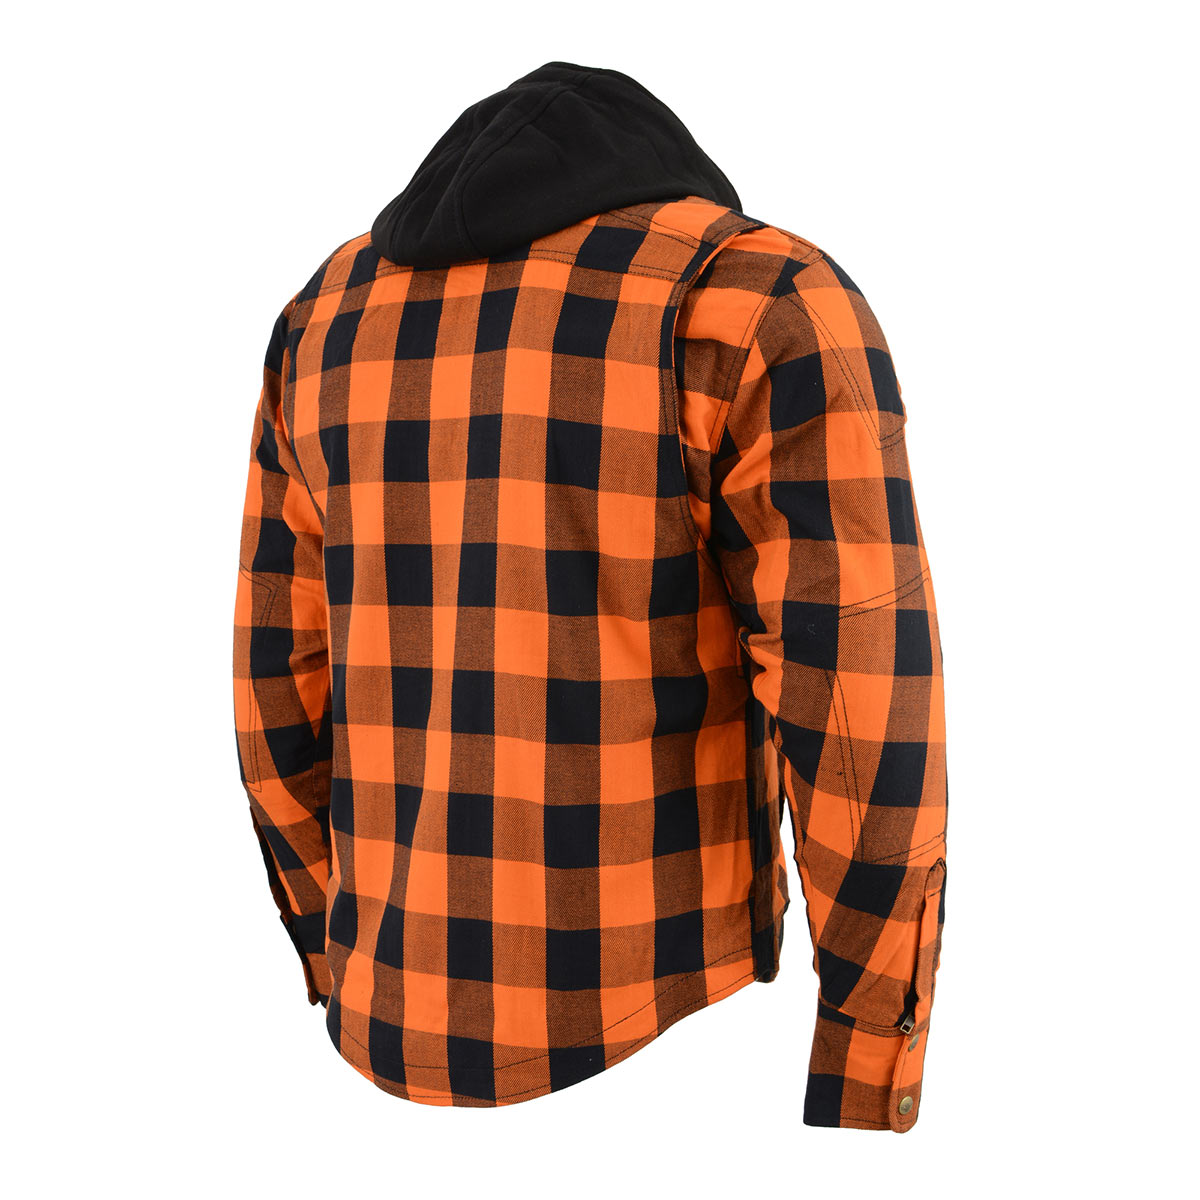 Milwaukee Leather MPM1642 Men's Plaid Hooded Flannel Biker Shirt with CE Approved Armor - Reinforced w/ Aramid Fibers